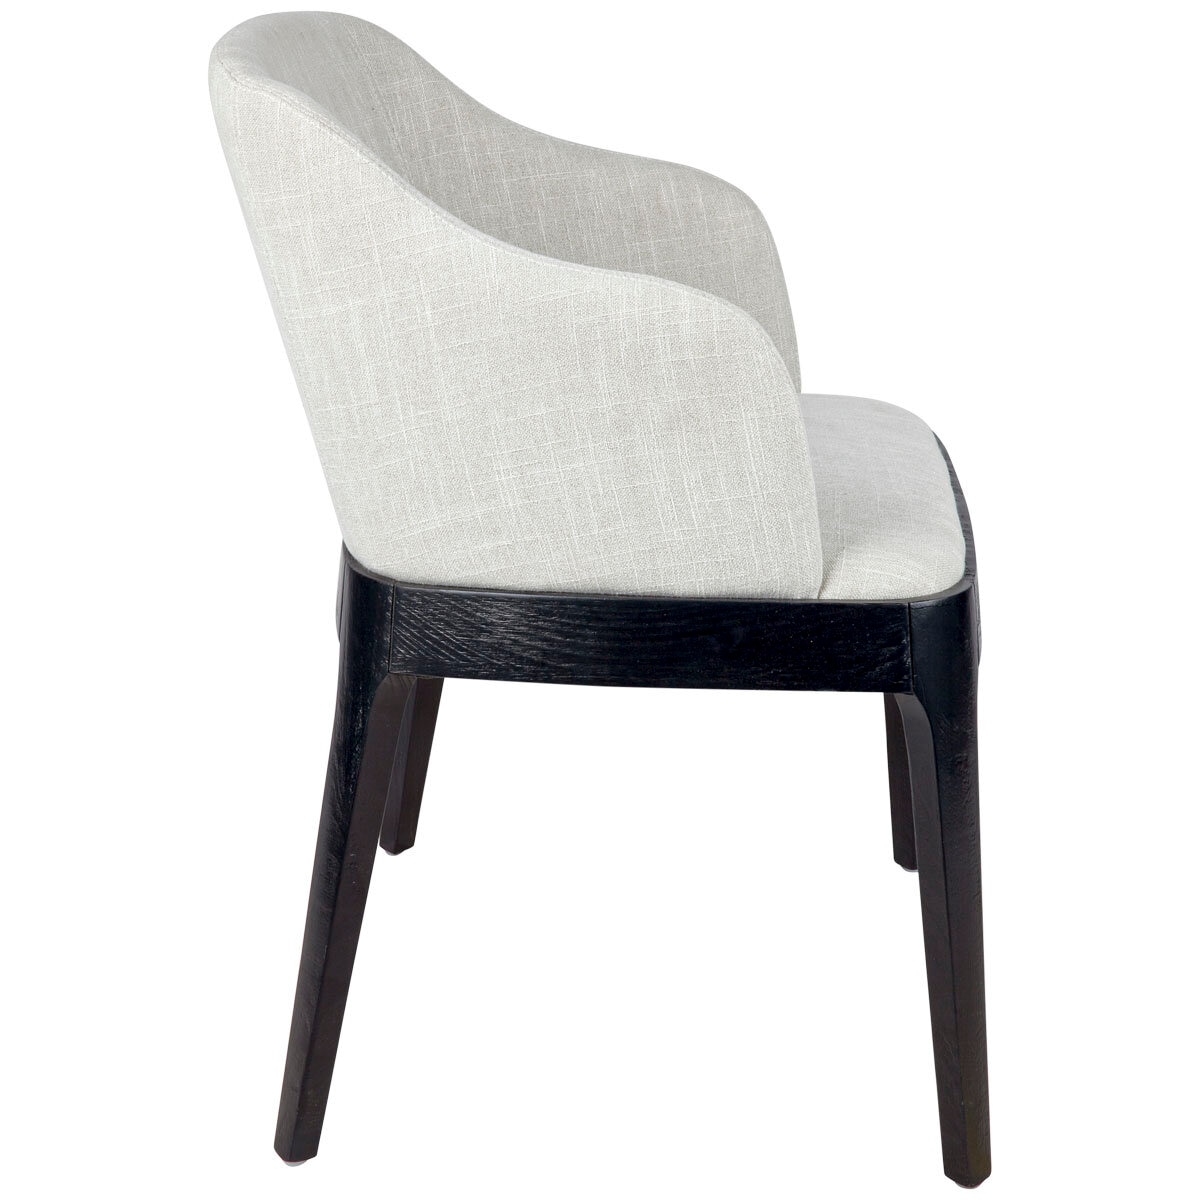 Café Lighting and Living Hayes Black Dining Chair, Natural/